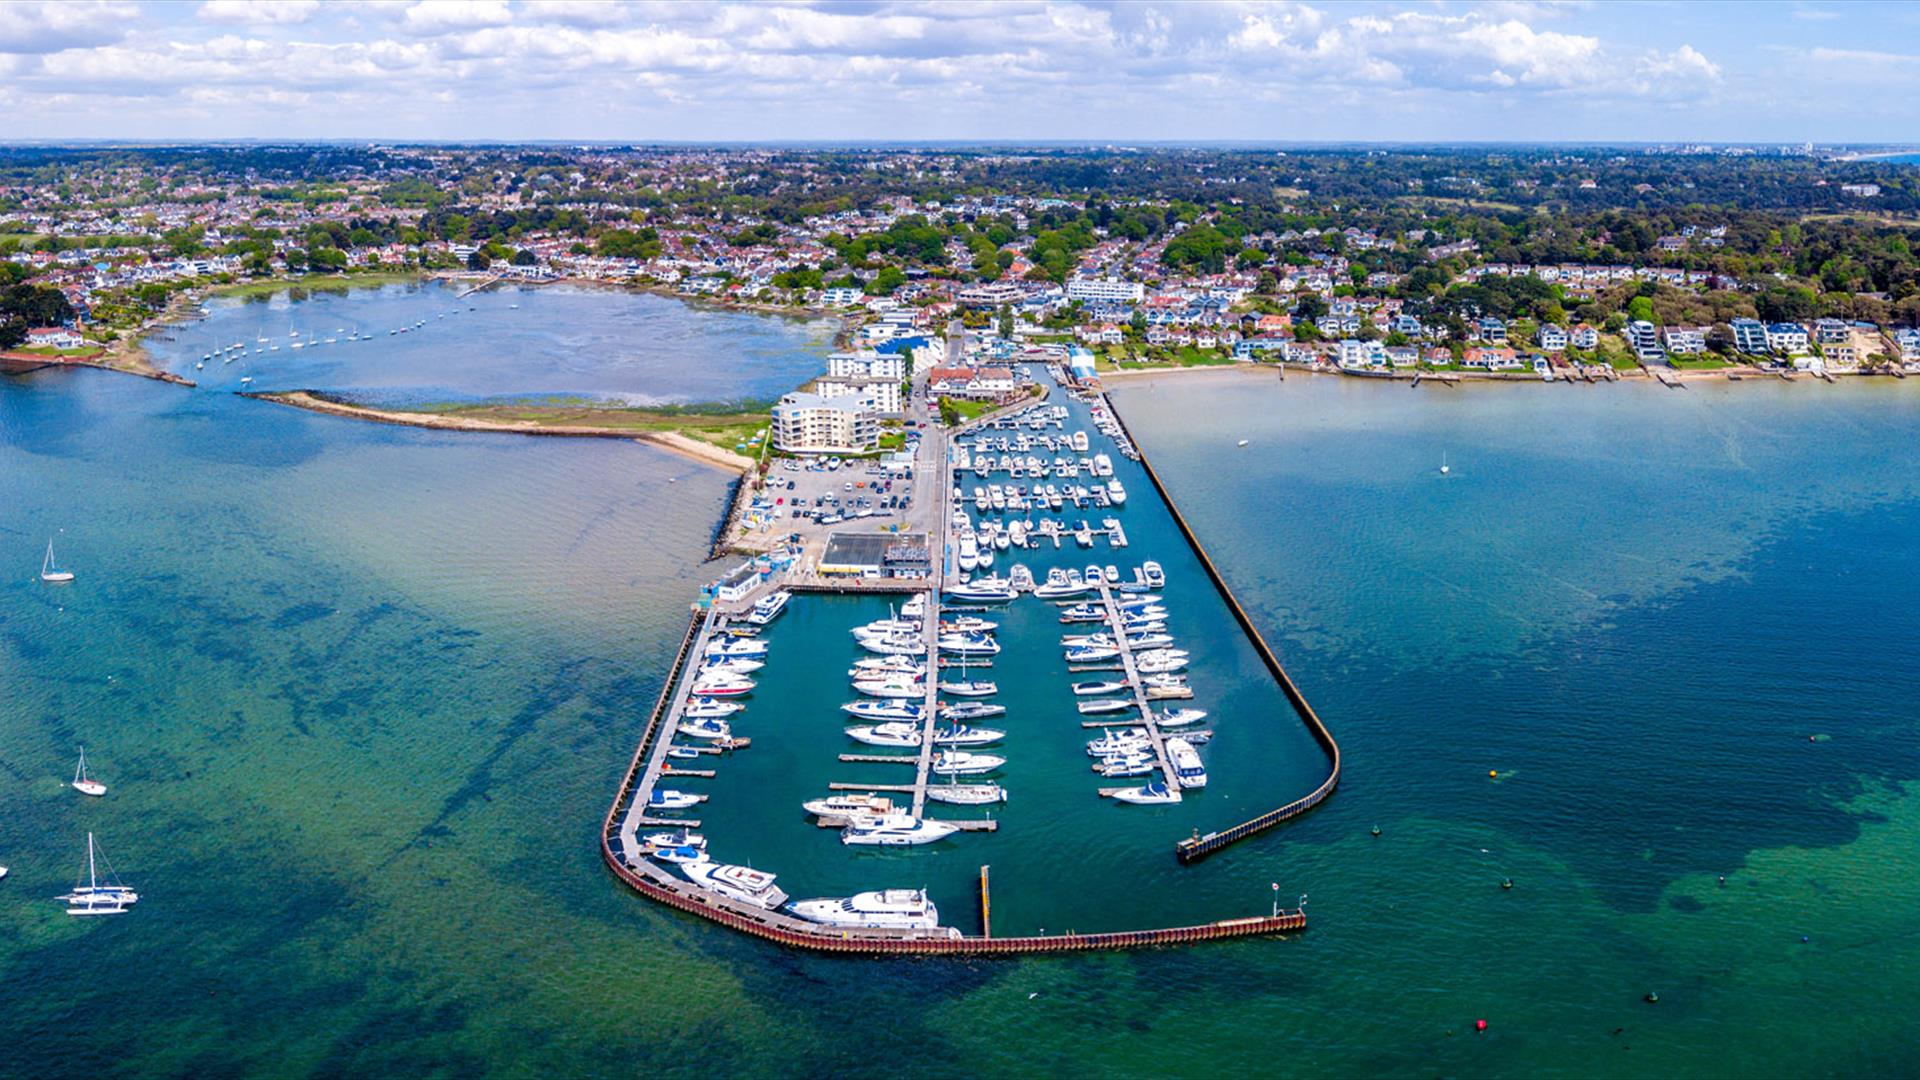 Drone shot of Poole area with boats moored on docking area